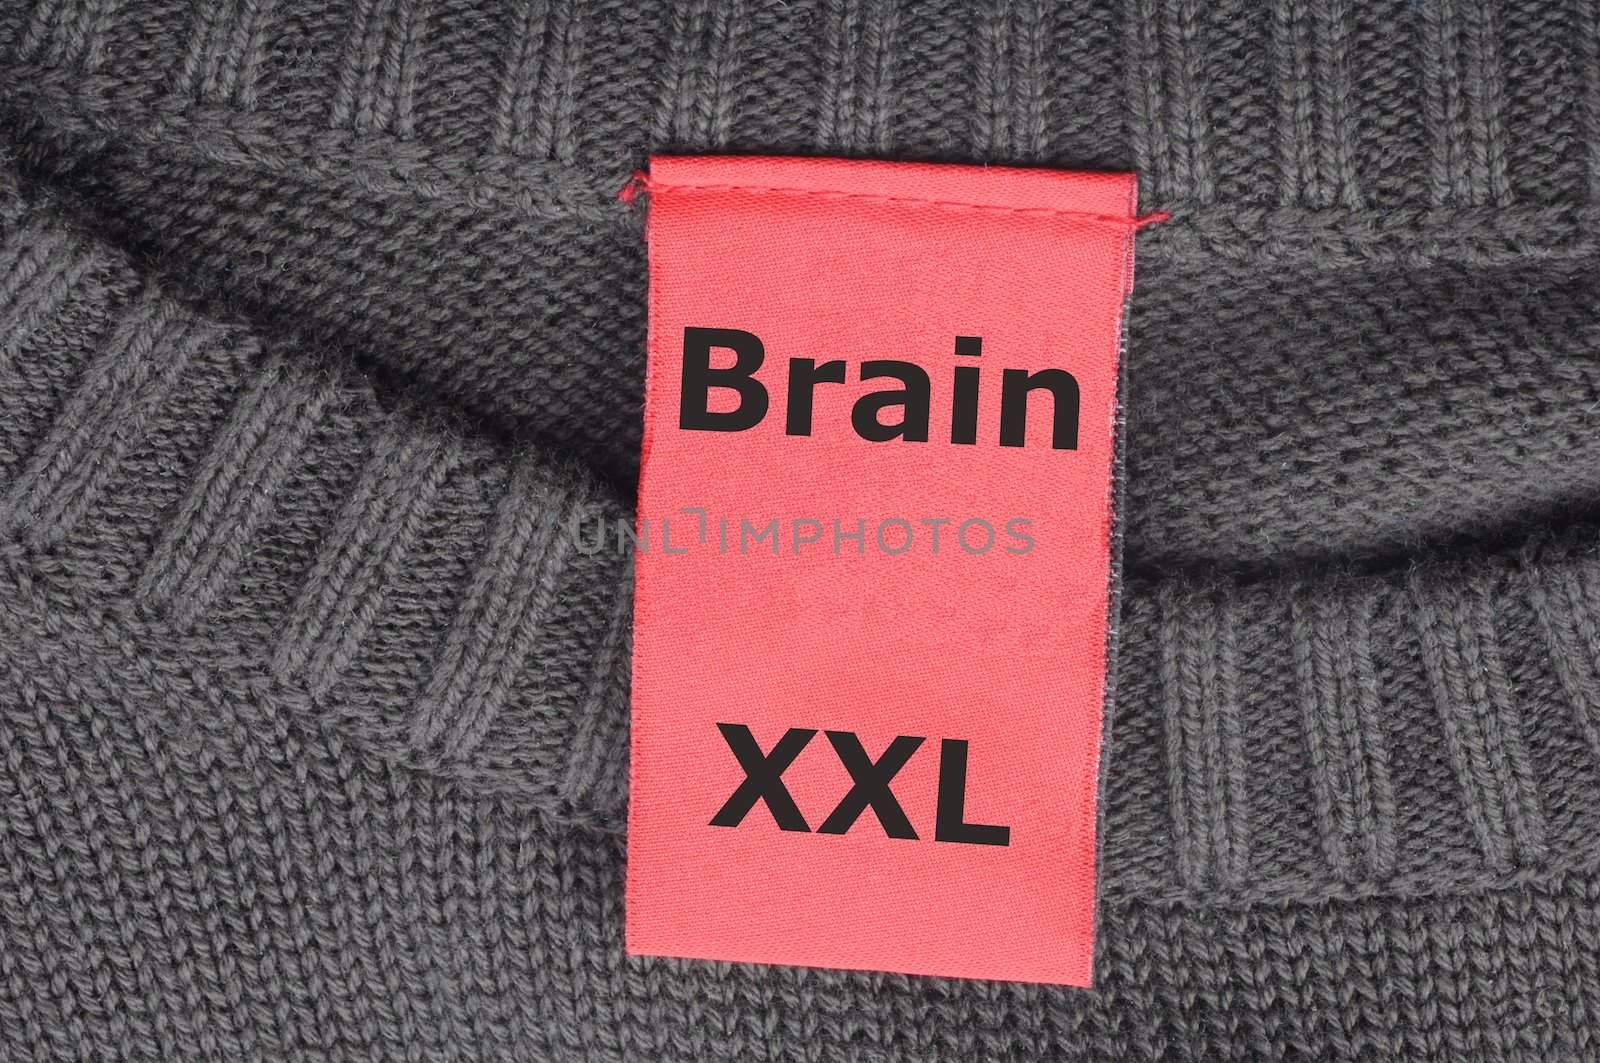 education concept with the word brain on a fashion label or tag and copyspace